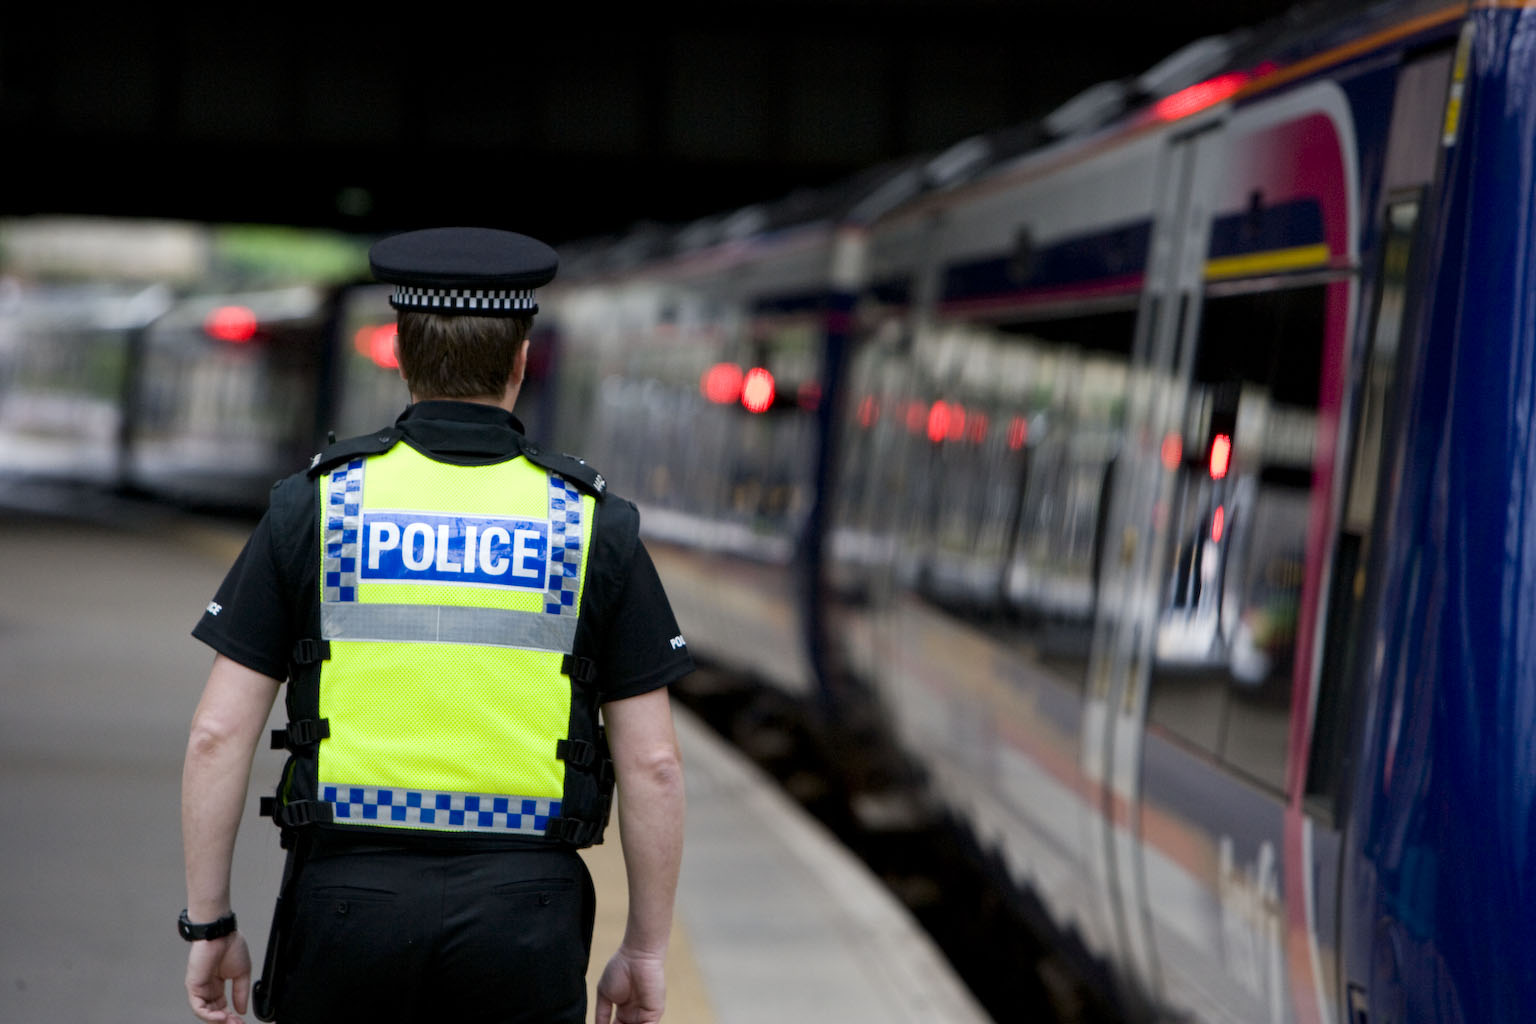 Authority seek new Assistant Chief Constable for BTP – closed